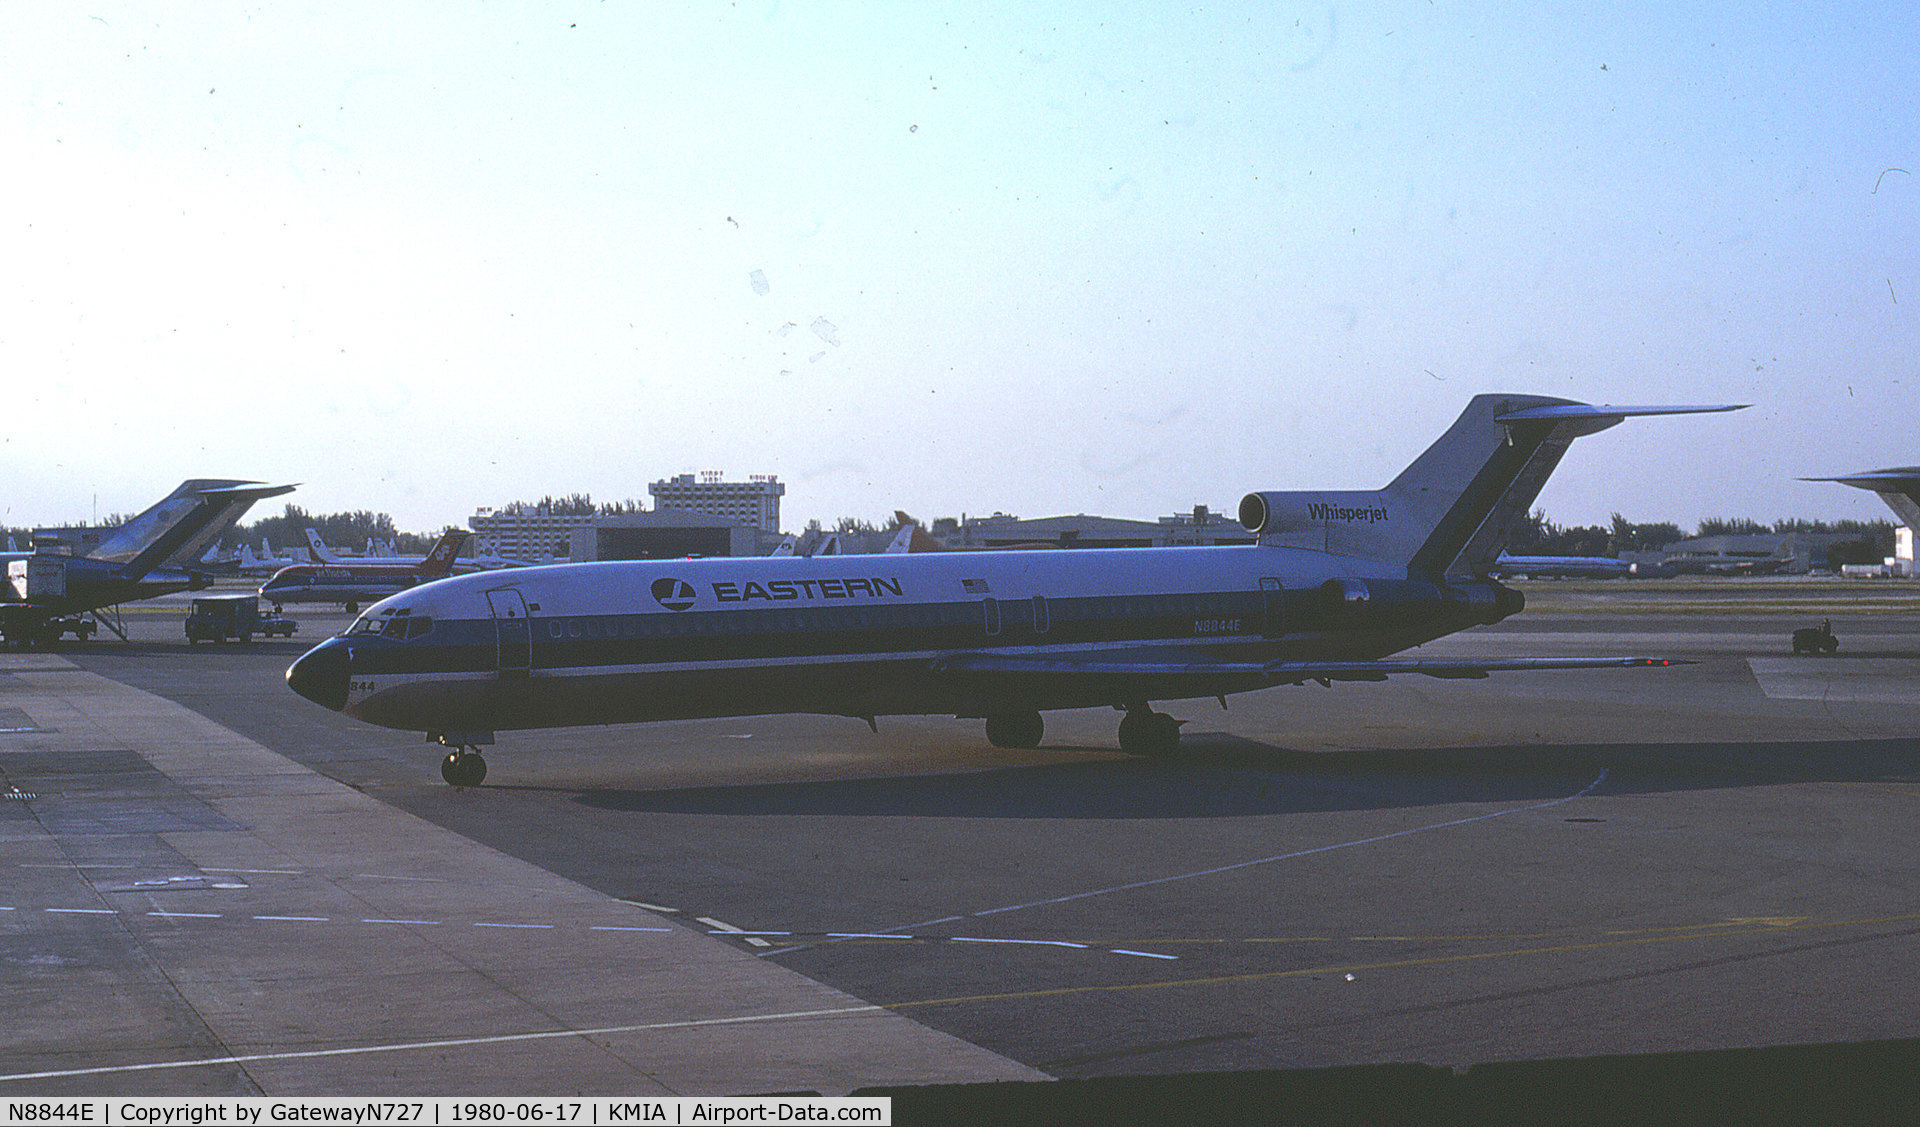 N8844E, 1970 Boeing 727-225 C/N 20442, Note the King's Inn in the background.